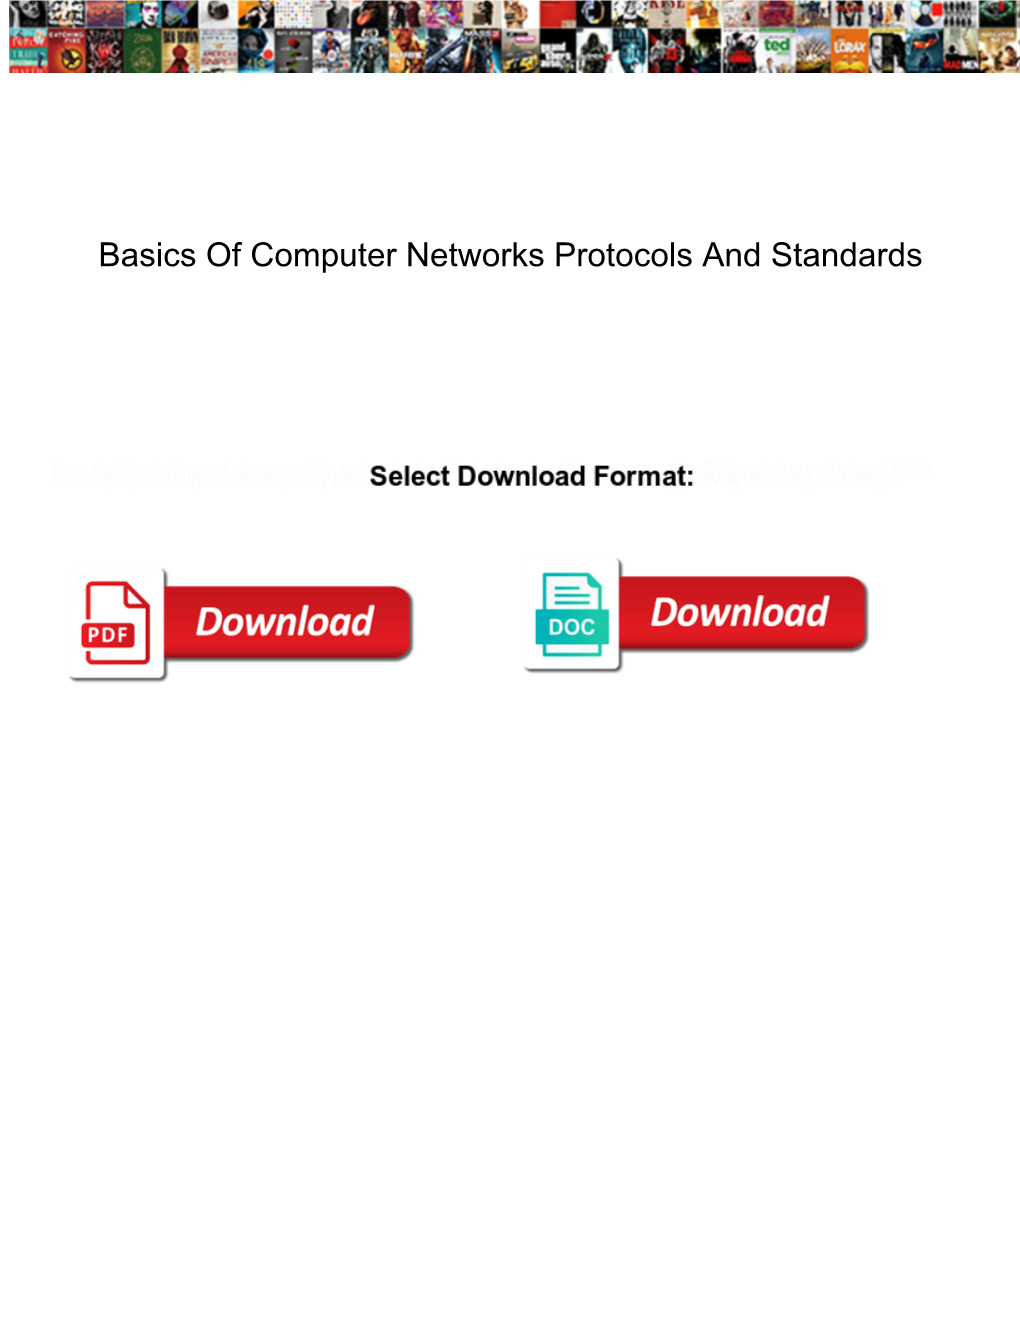 Basics of Computer Networks Protocols and Standards